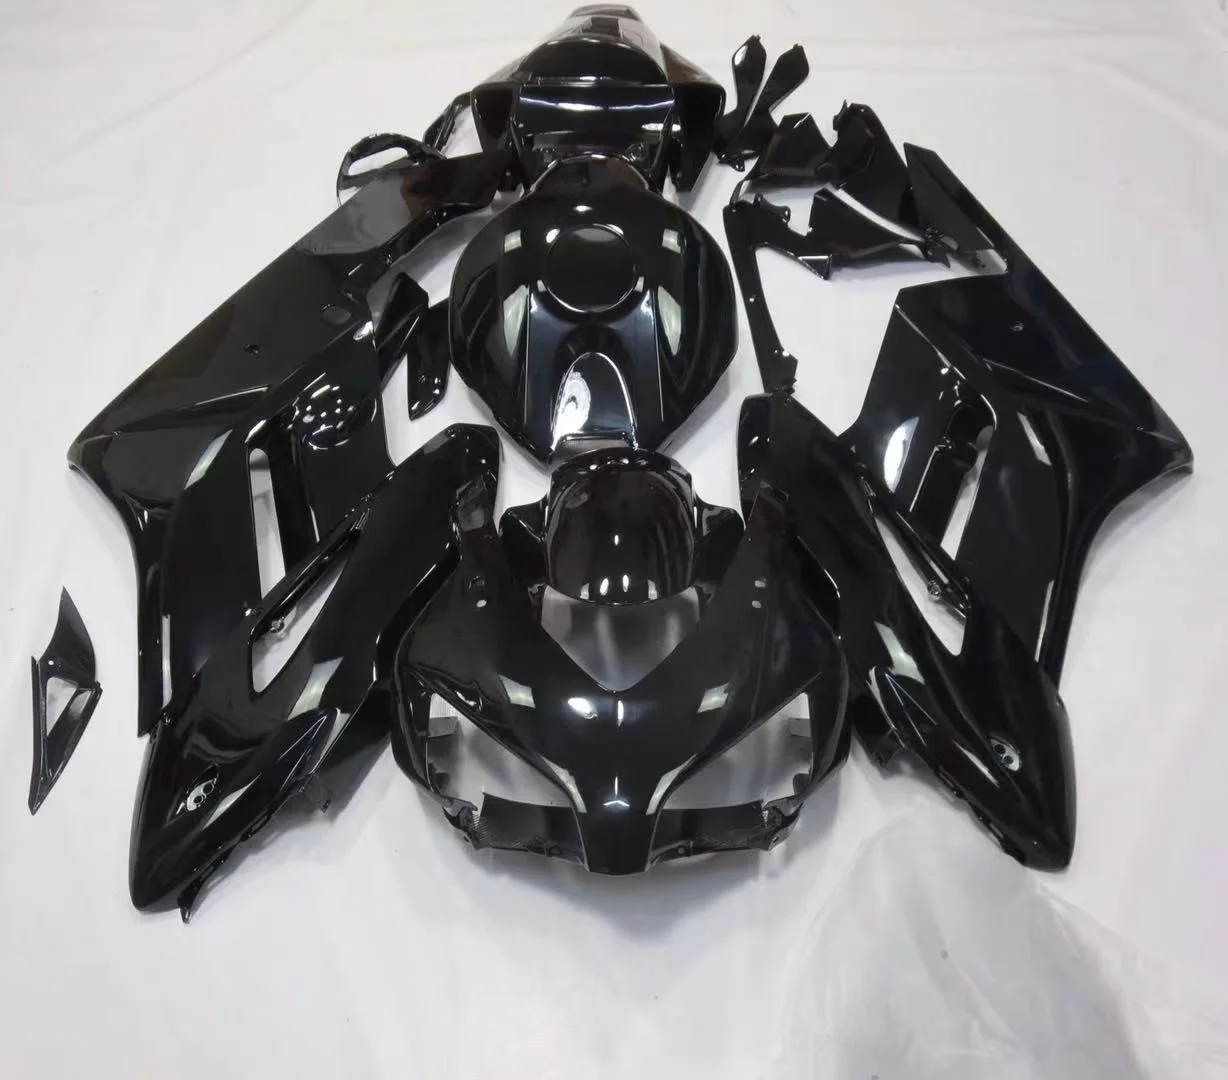 

2022 WHSC ABS Plastic Fairing Bodywork Kit For HONDA CBR1000 2004-2005 Motorcycle Accessories Black, Pictures shown